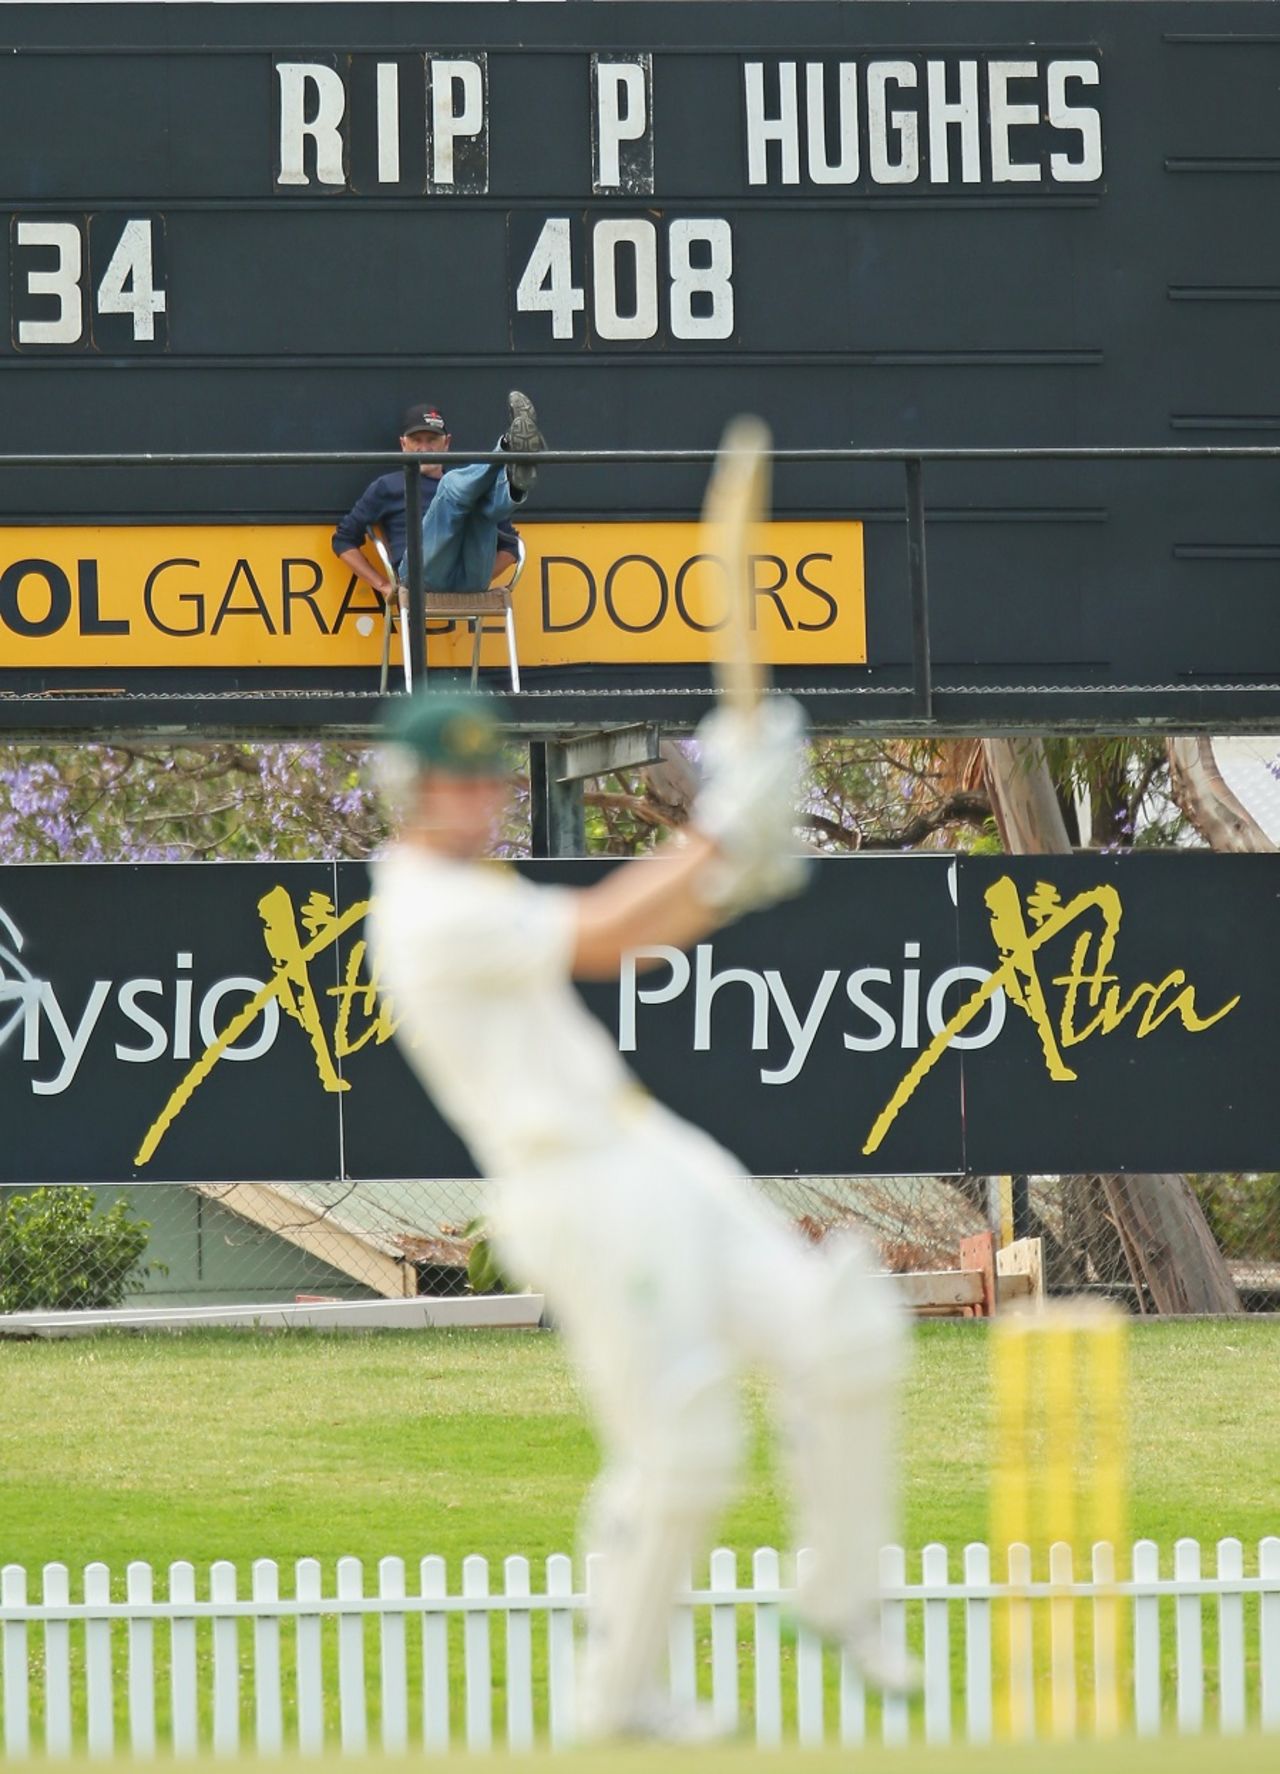 The scoreboard displays a tribute to Phillip Hughes, Cricket Australia XI v Indians, 1st day, Tour match, Adelaide